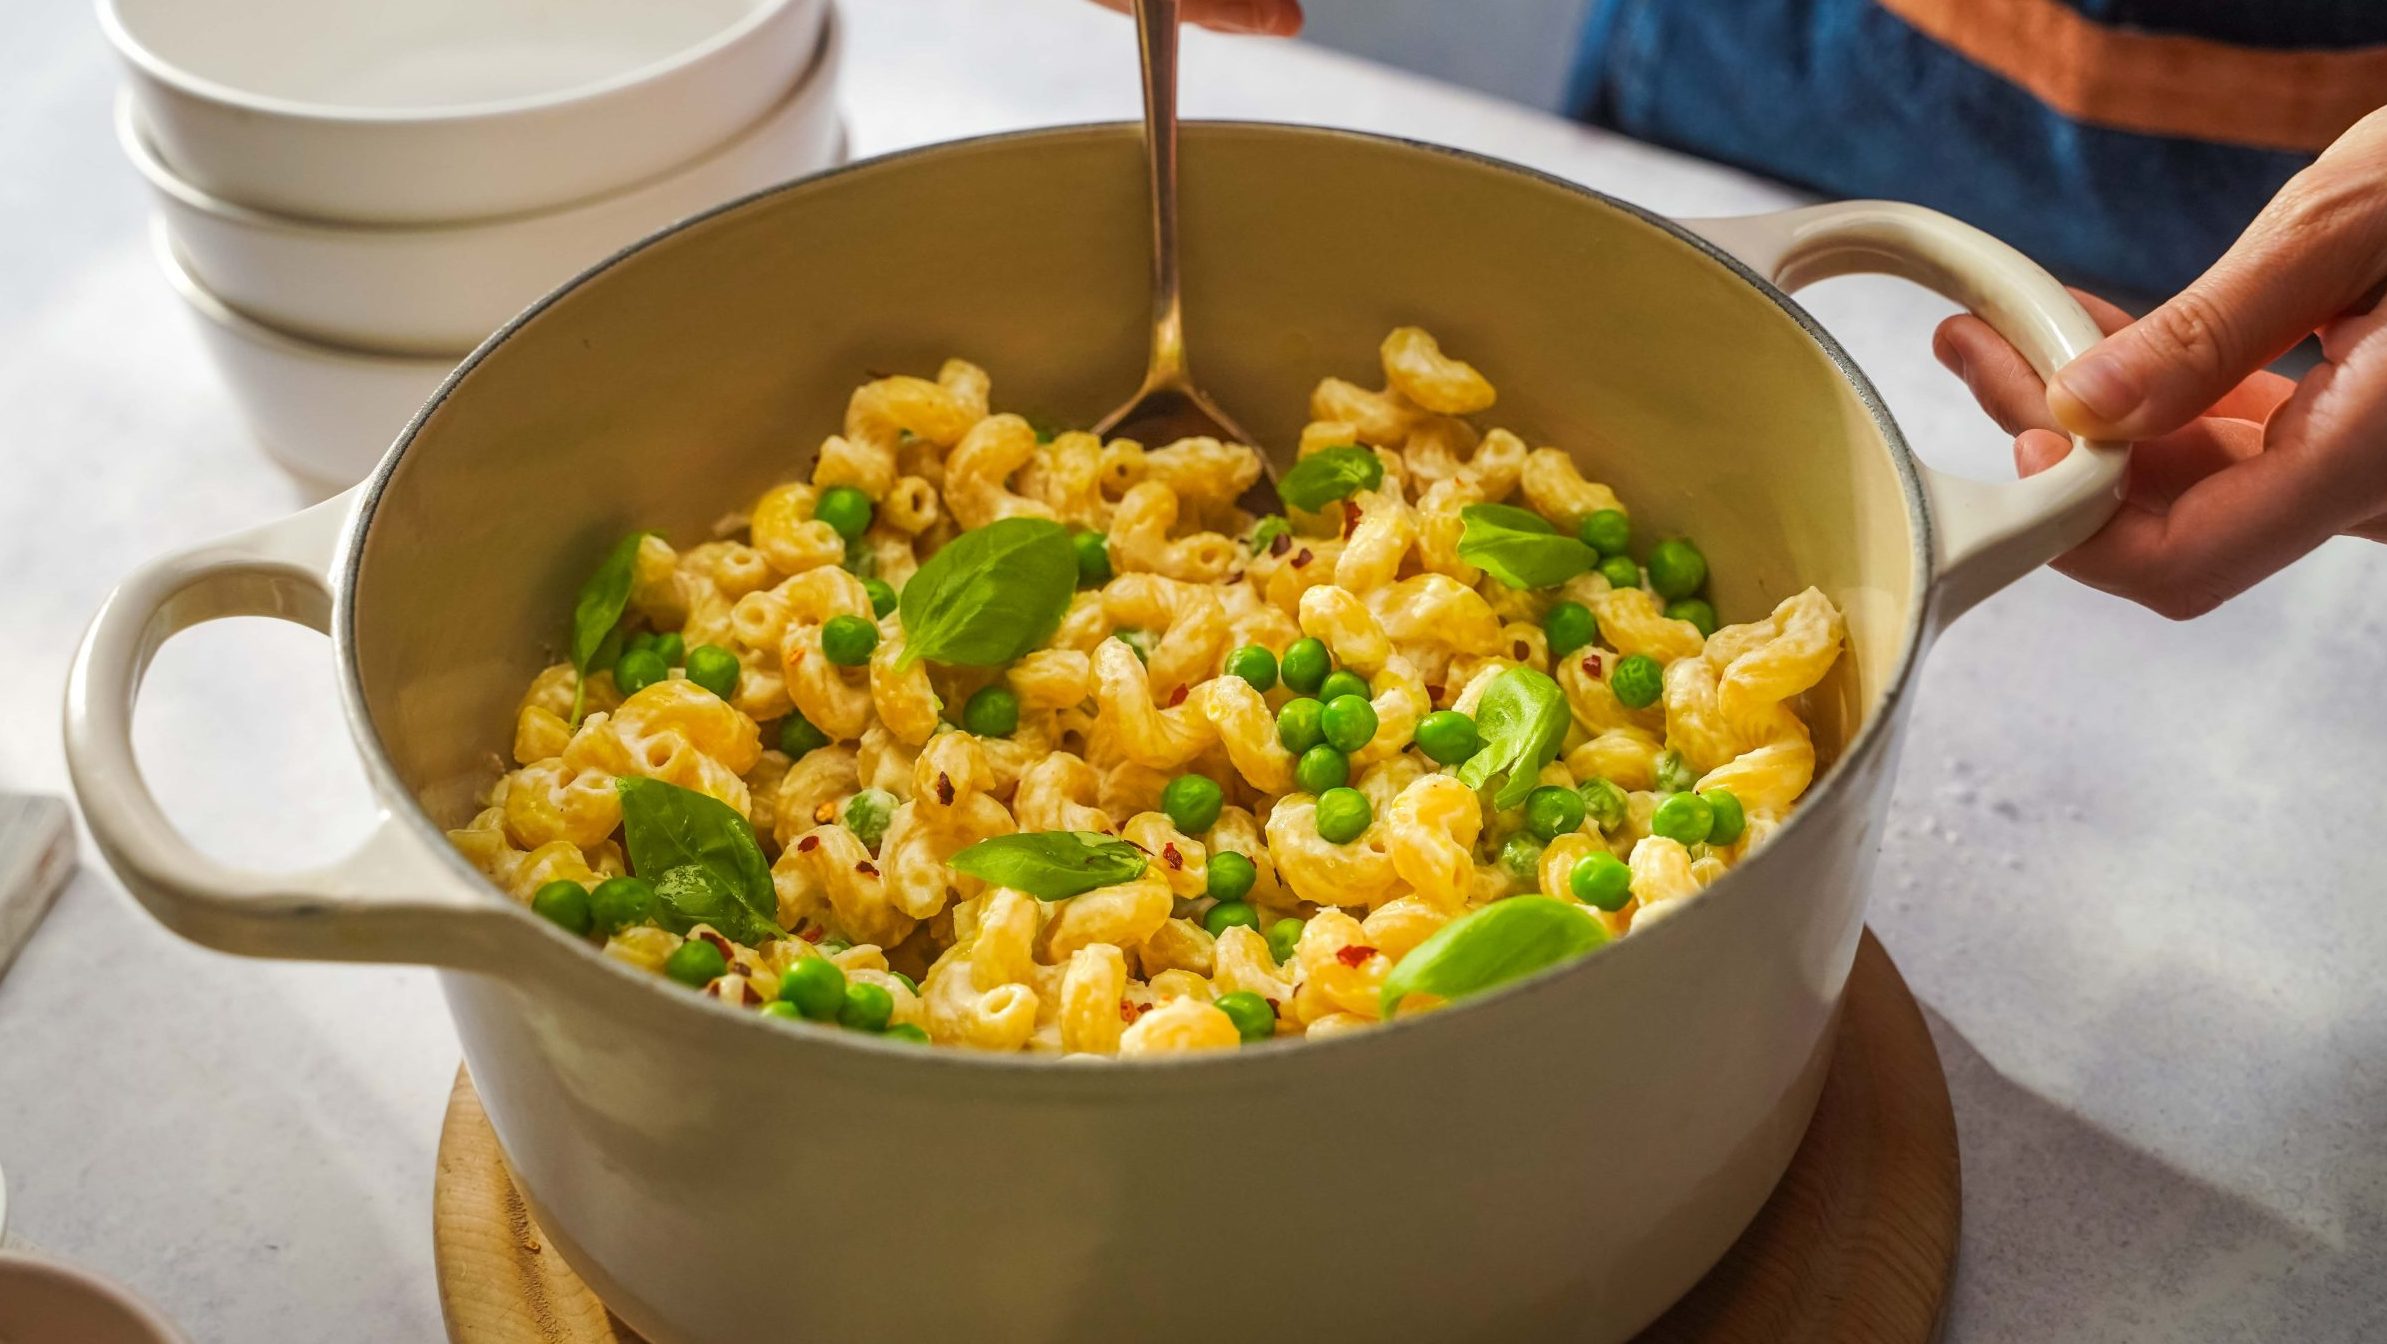 A pot of cream coloured pasta with peas, basil, and a spoon scooping.